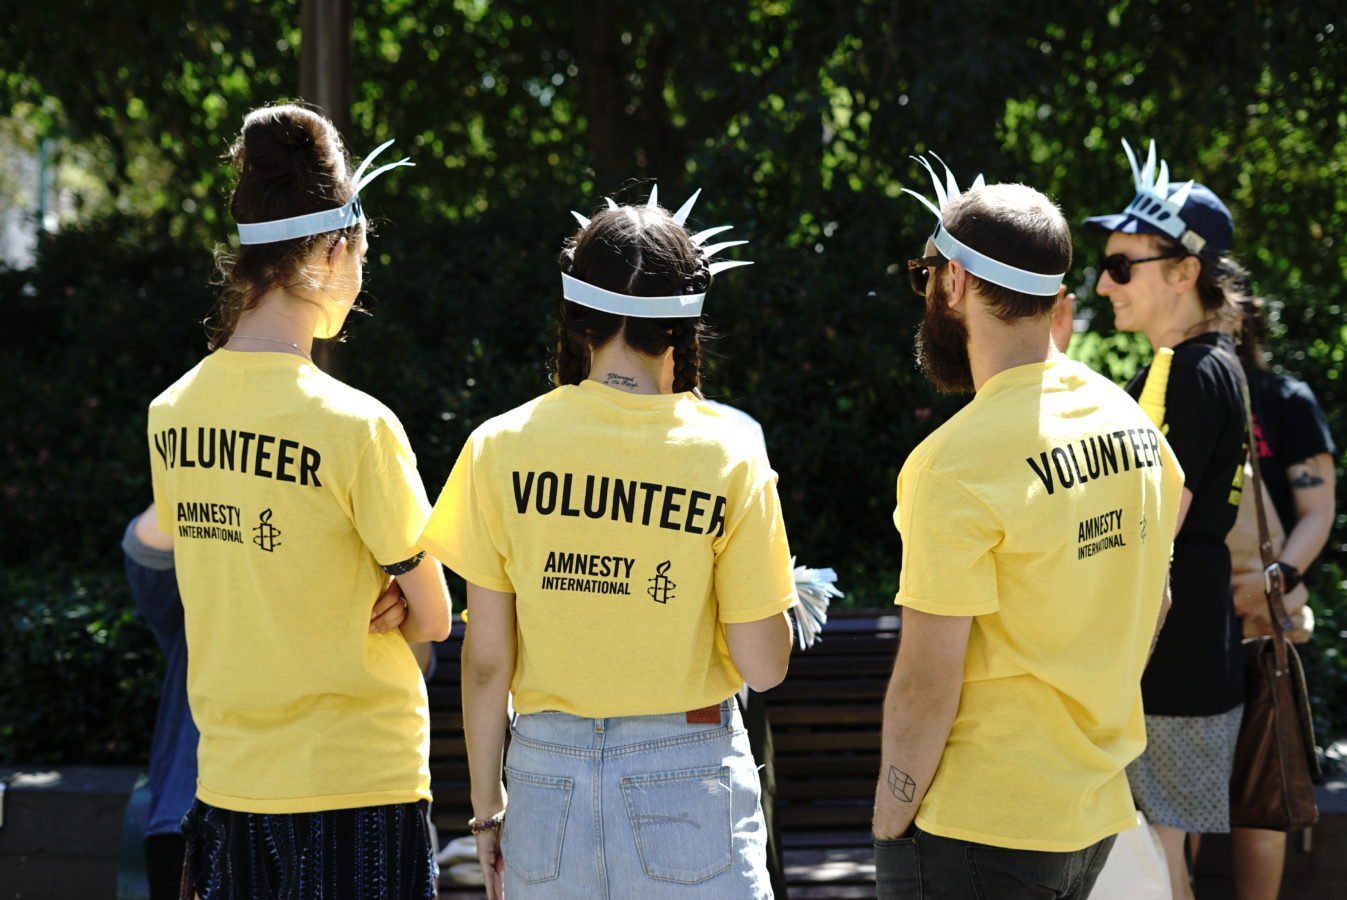 3 people with their backs to the camera show yellow volunteer t shirts